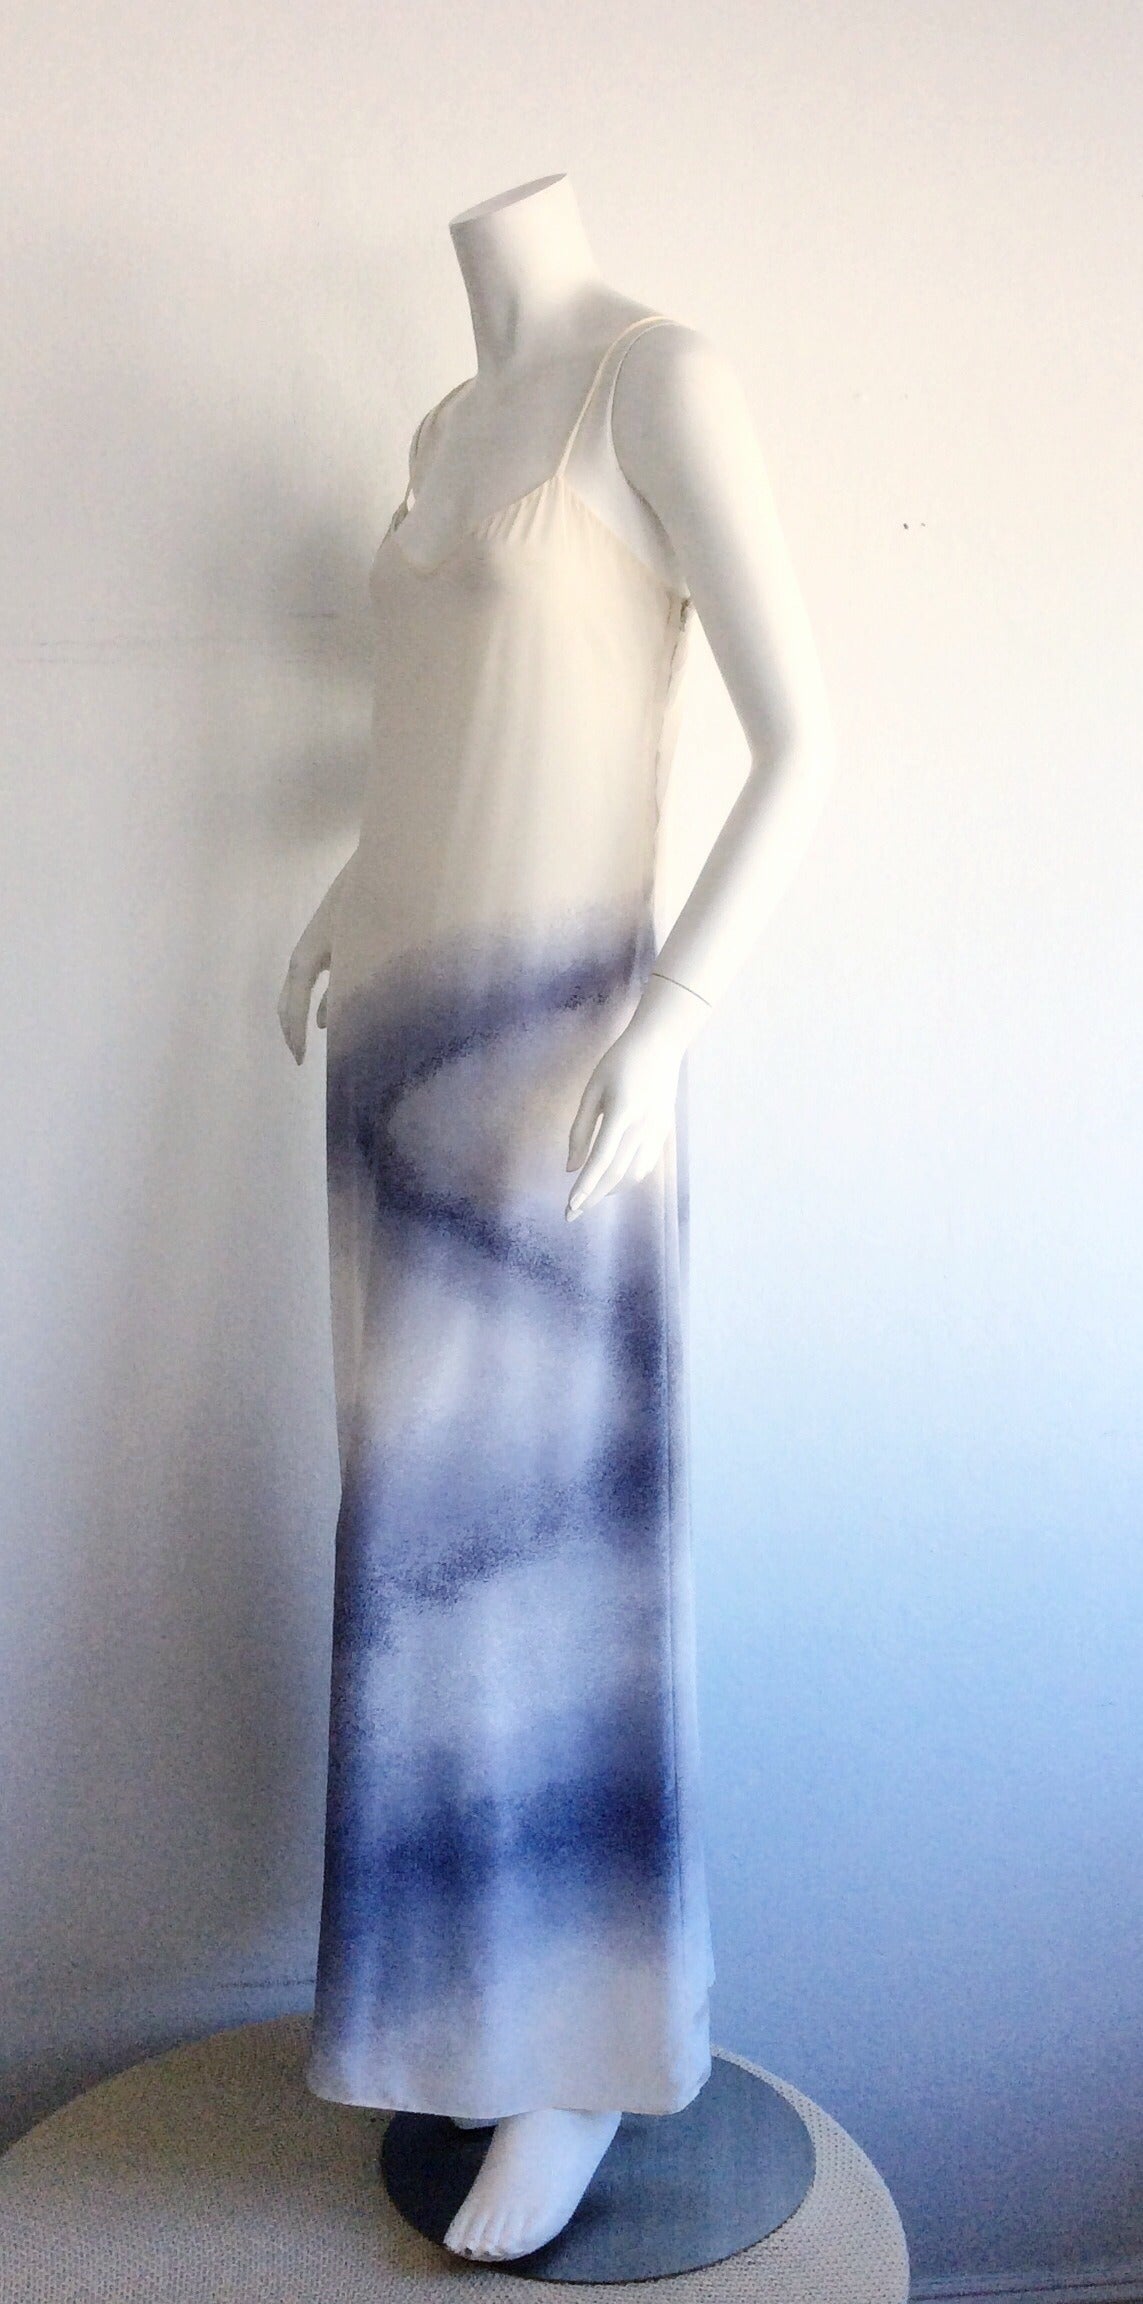 Ultra rare 1970s vintage Halston silk ivory dress, with blue ombré effect. Documented dress, with the figure flattering cut Halston was famous for. Bears the original Halston label, along with Neiman Marcus label. Never worn, in great condition.